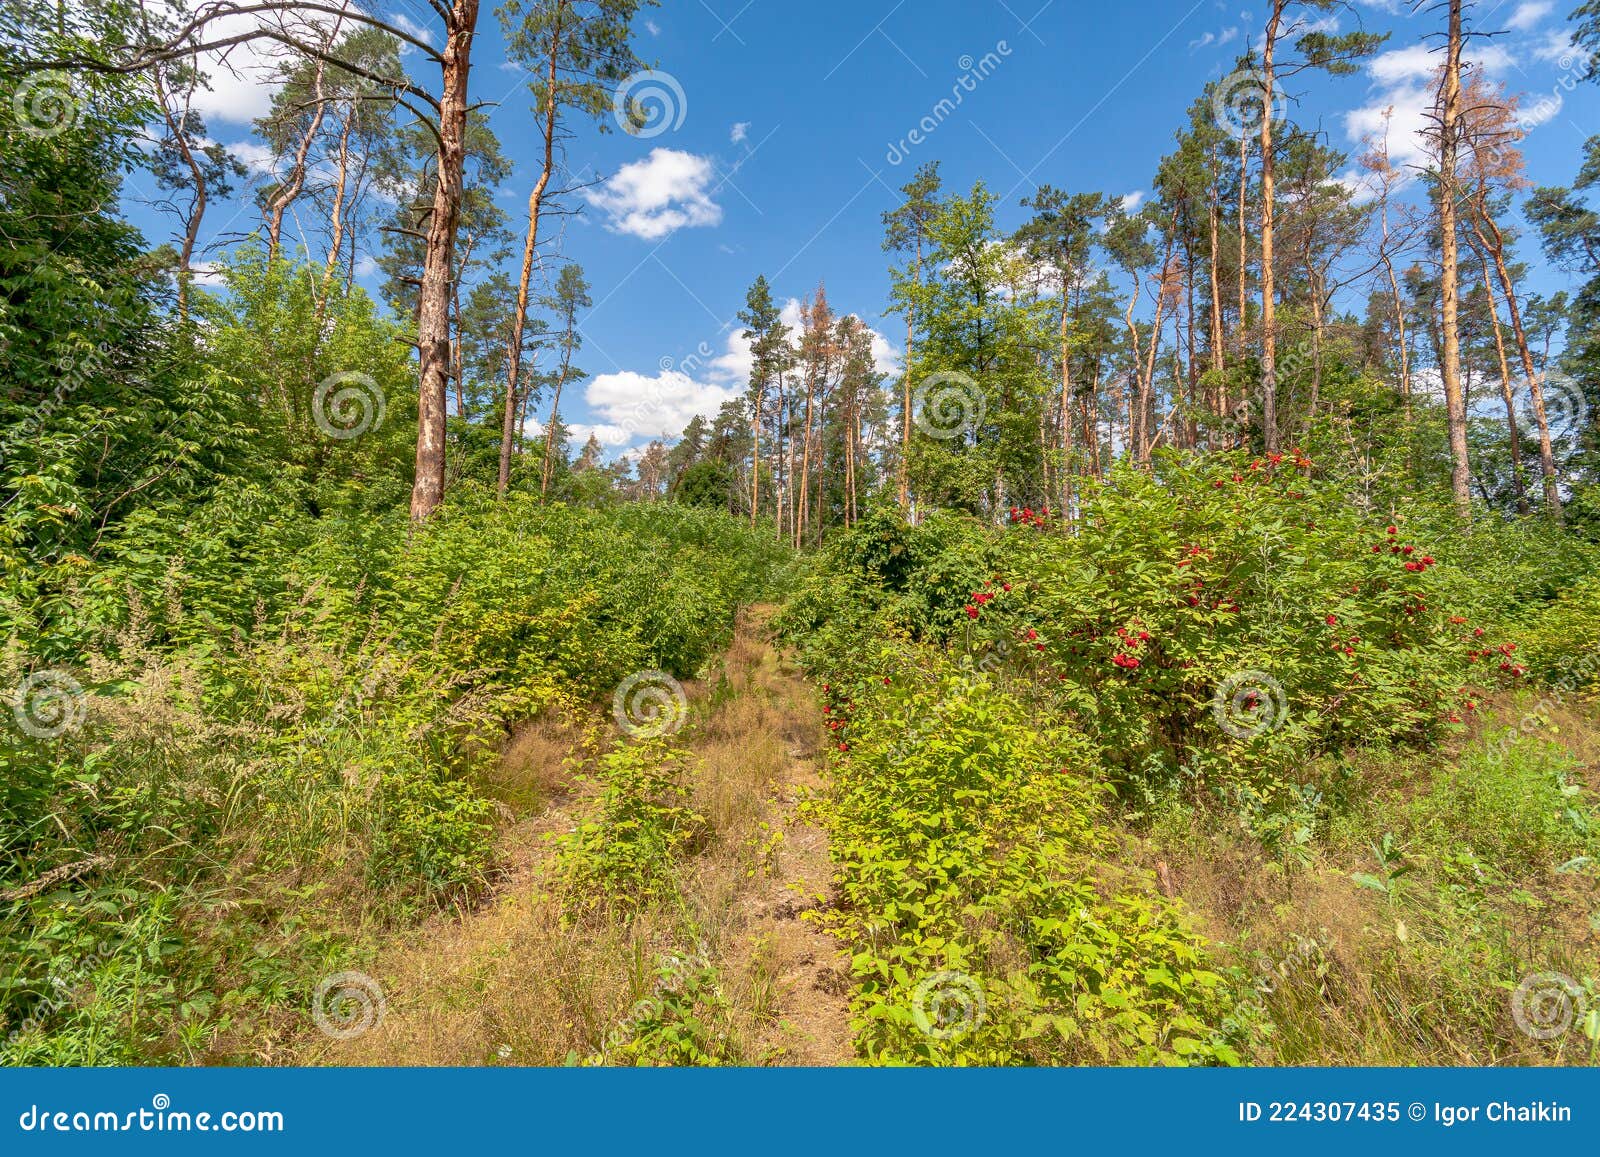 Beautiful Summer Forest on a Sunny Day. Stock Image - Image of summer ...